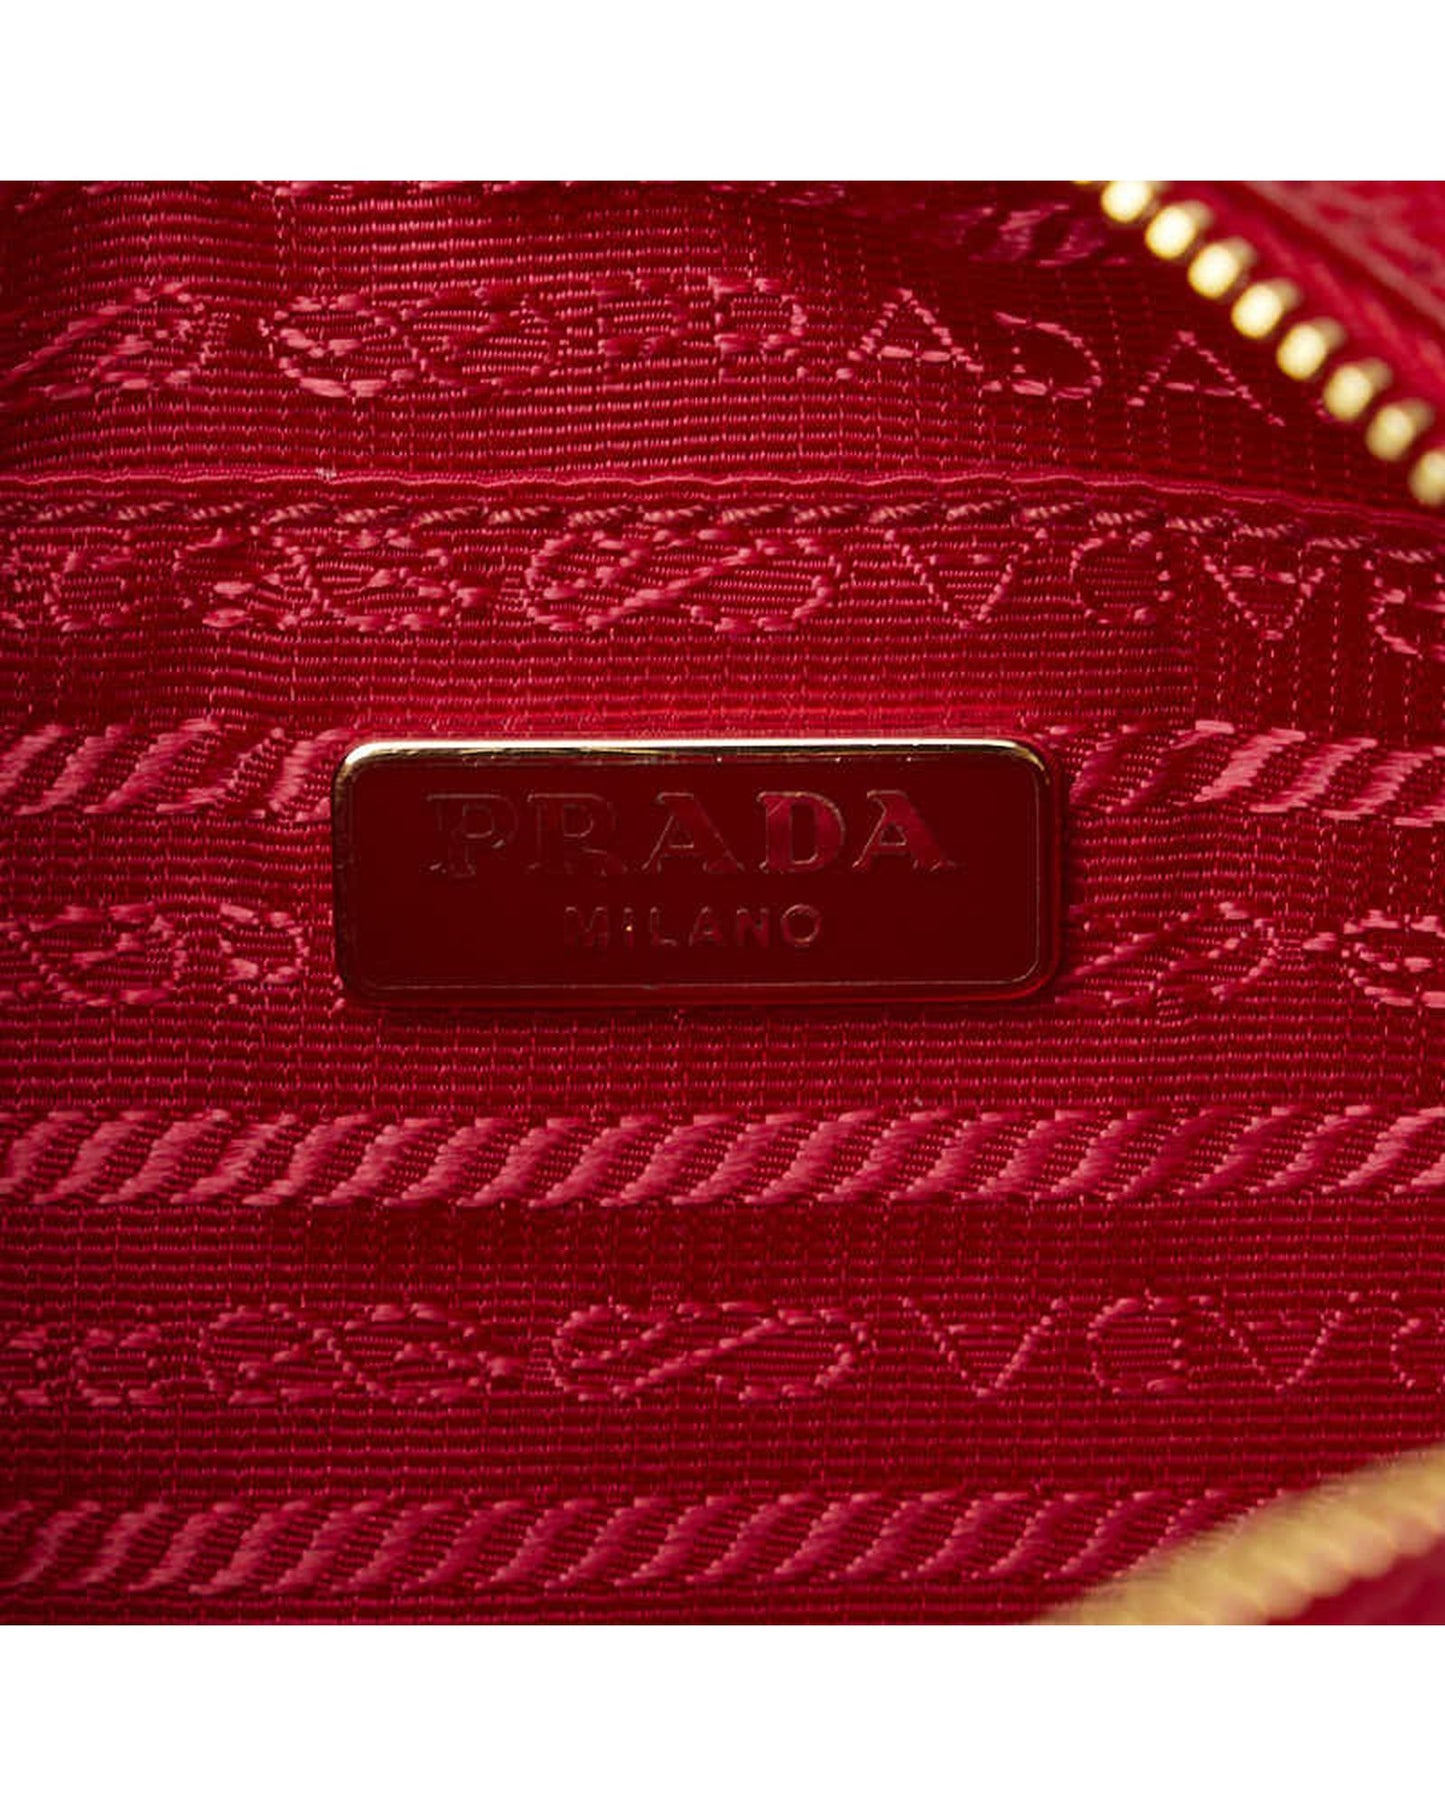 Prada Women's Red Vernice Bow Crossbody Bag in Excellent Condition in Red